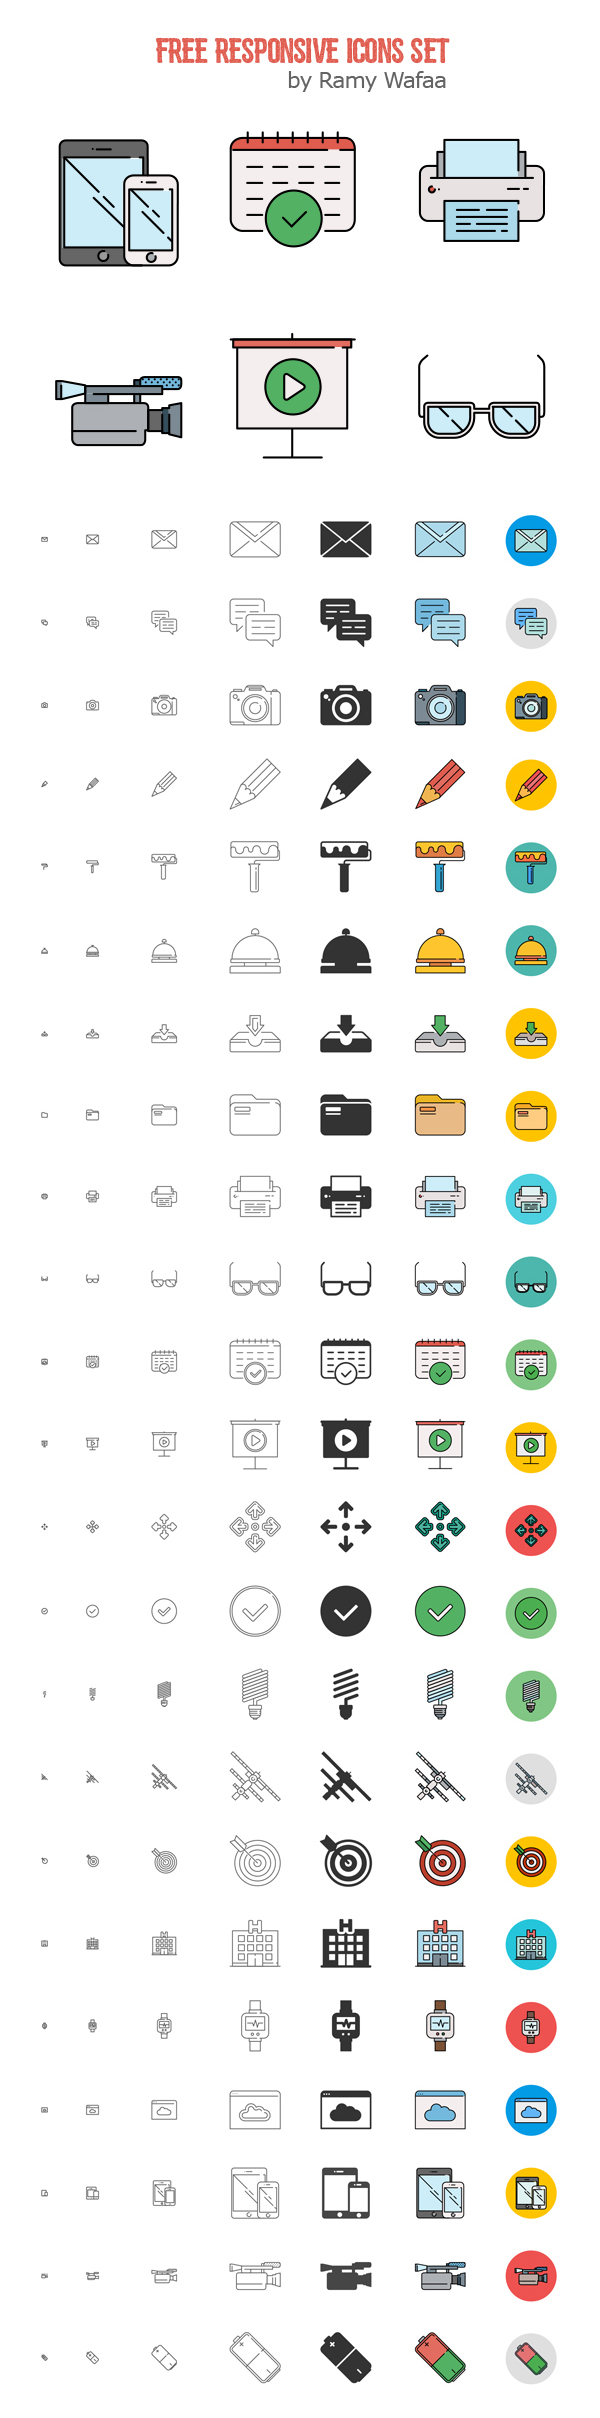 Free Responsive Material Icons Set  (192 Icons)